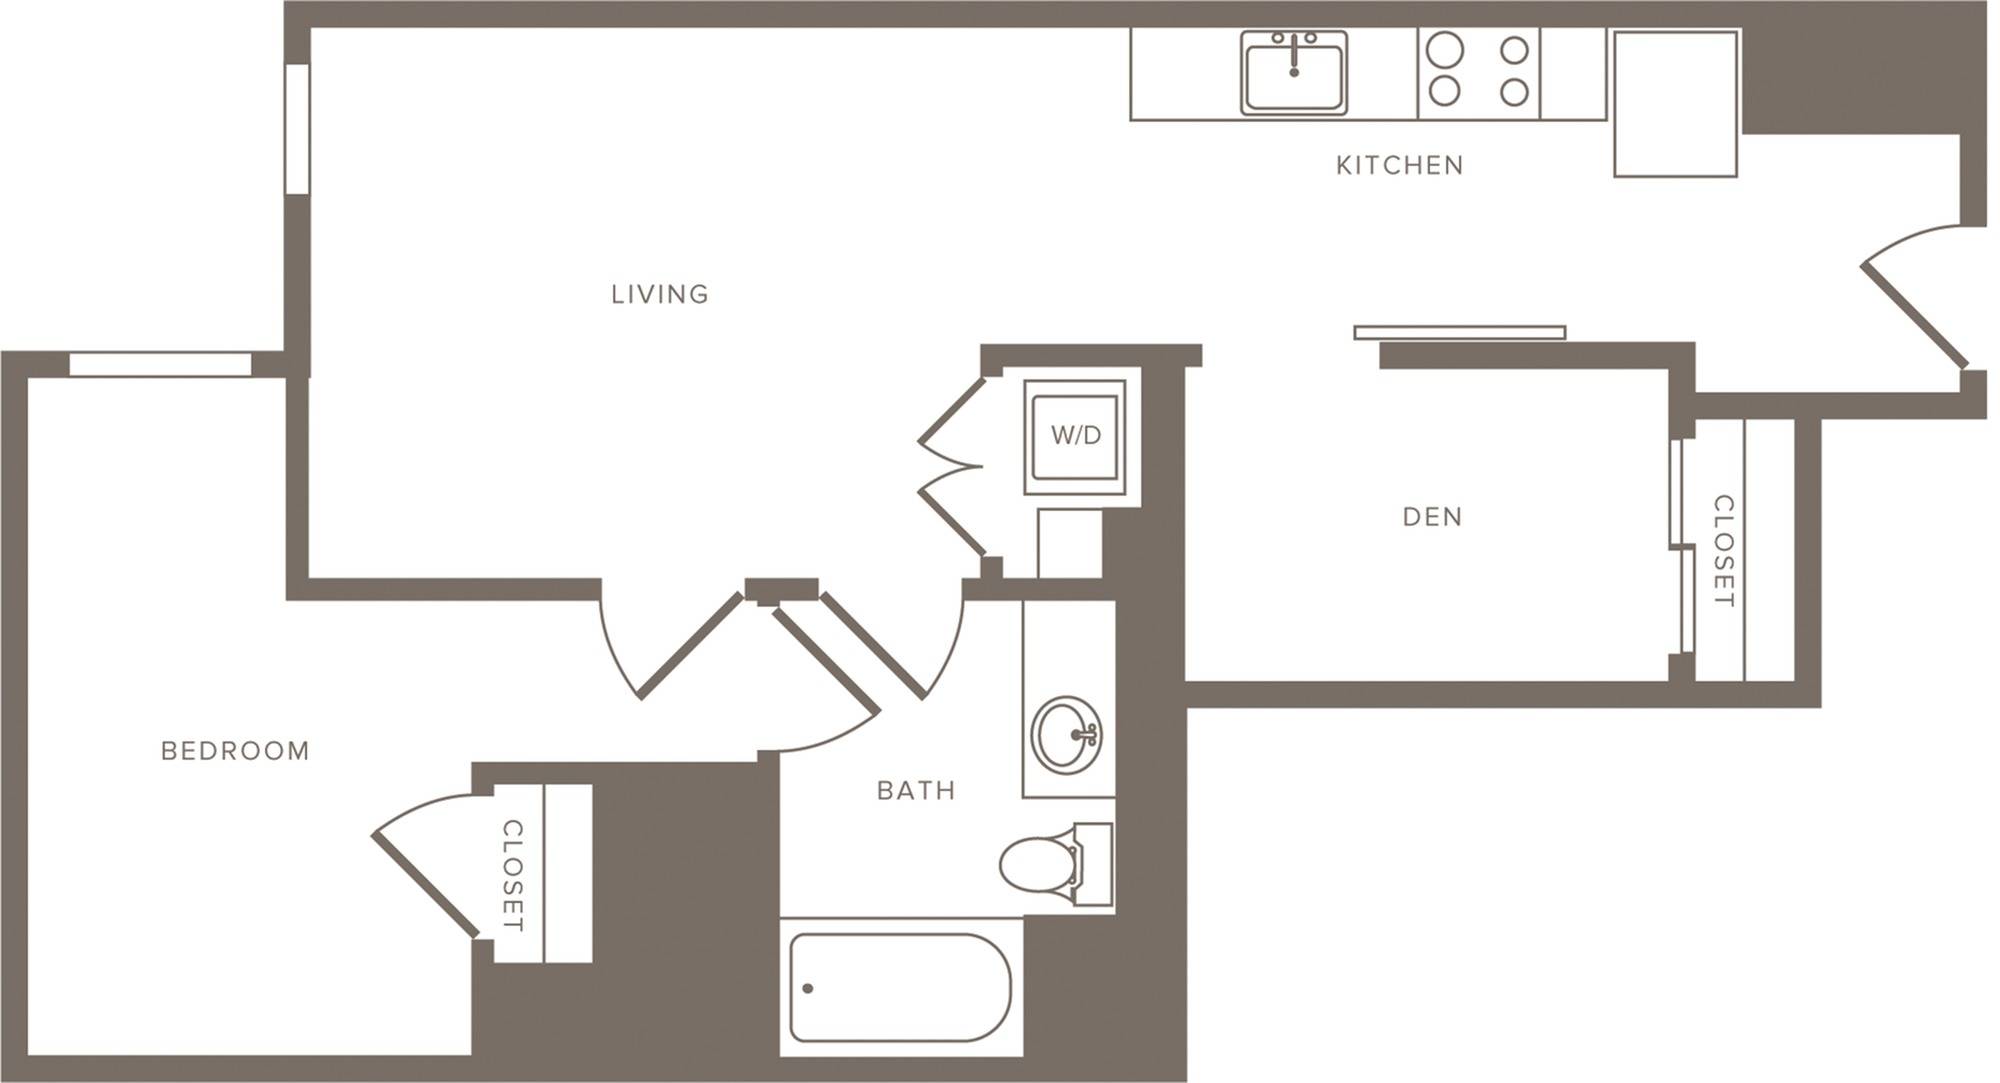 795 square foot home floor plan image